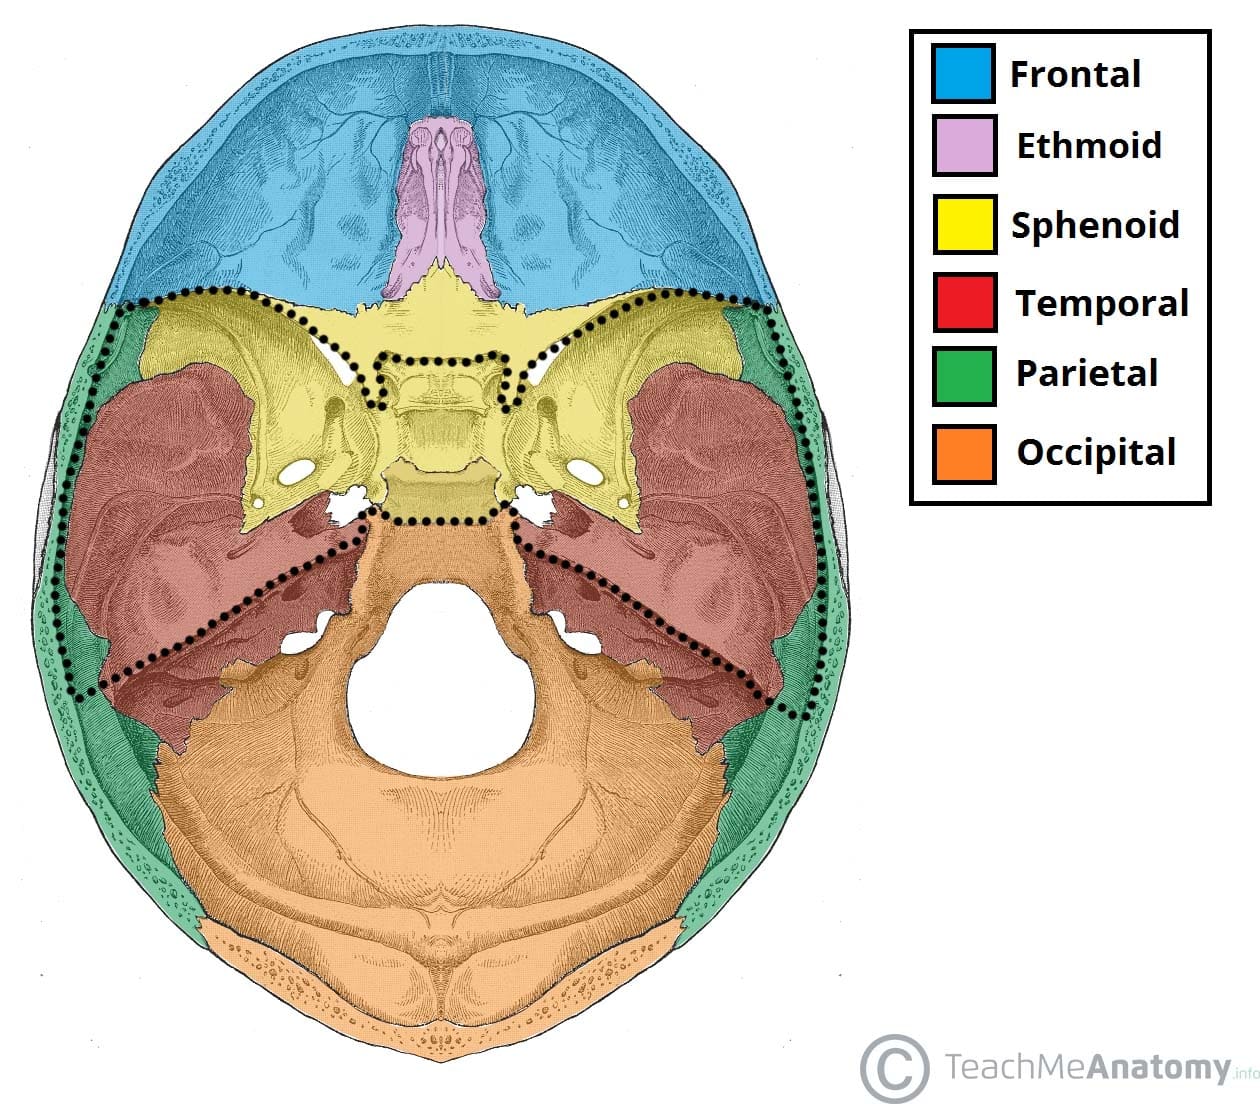 Medial view of left knee region highlighting various fascial components